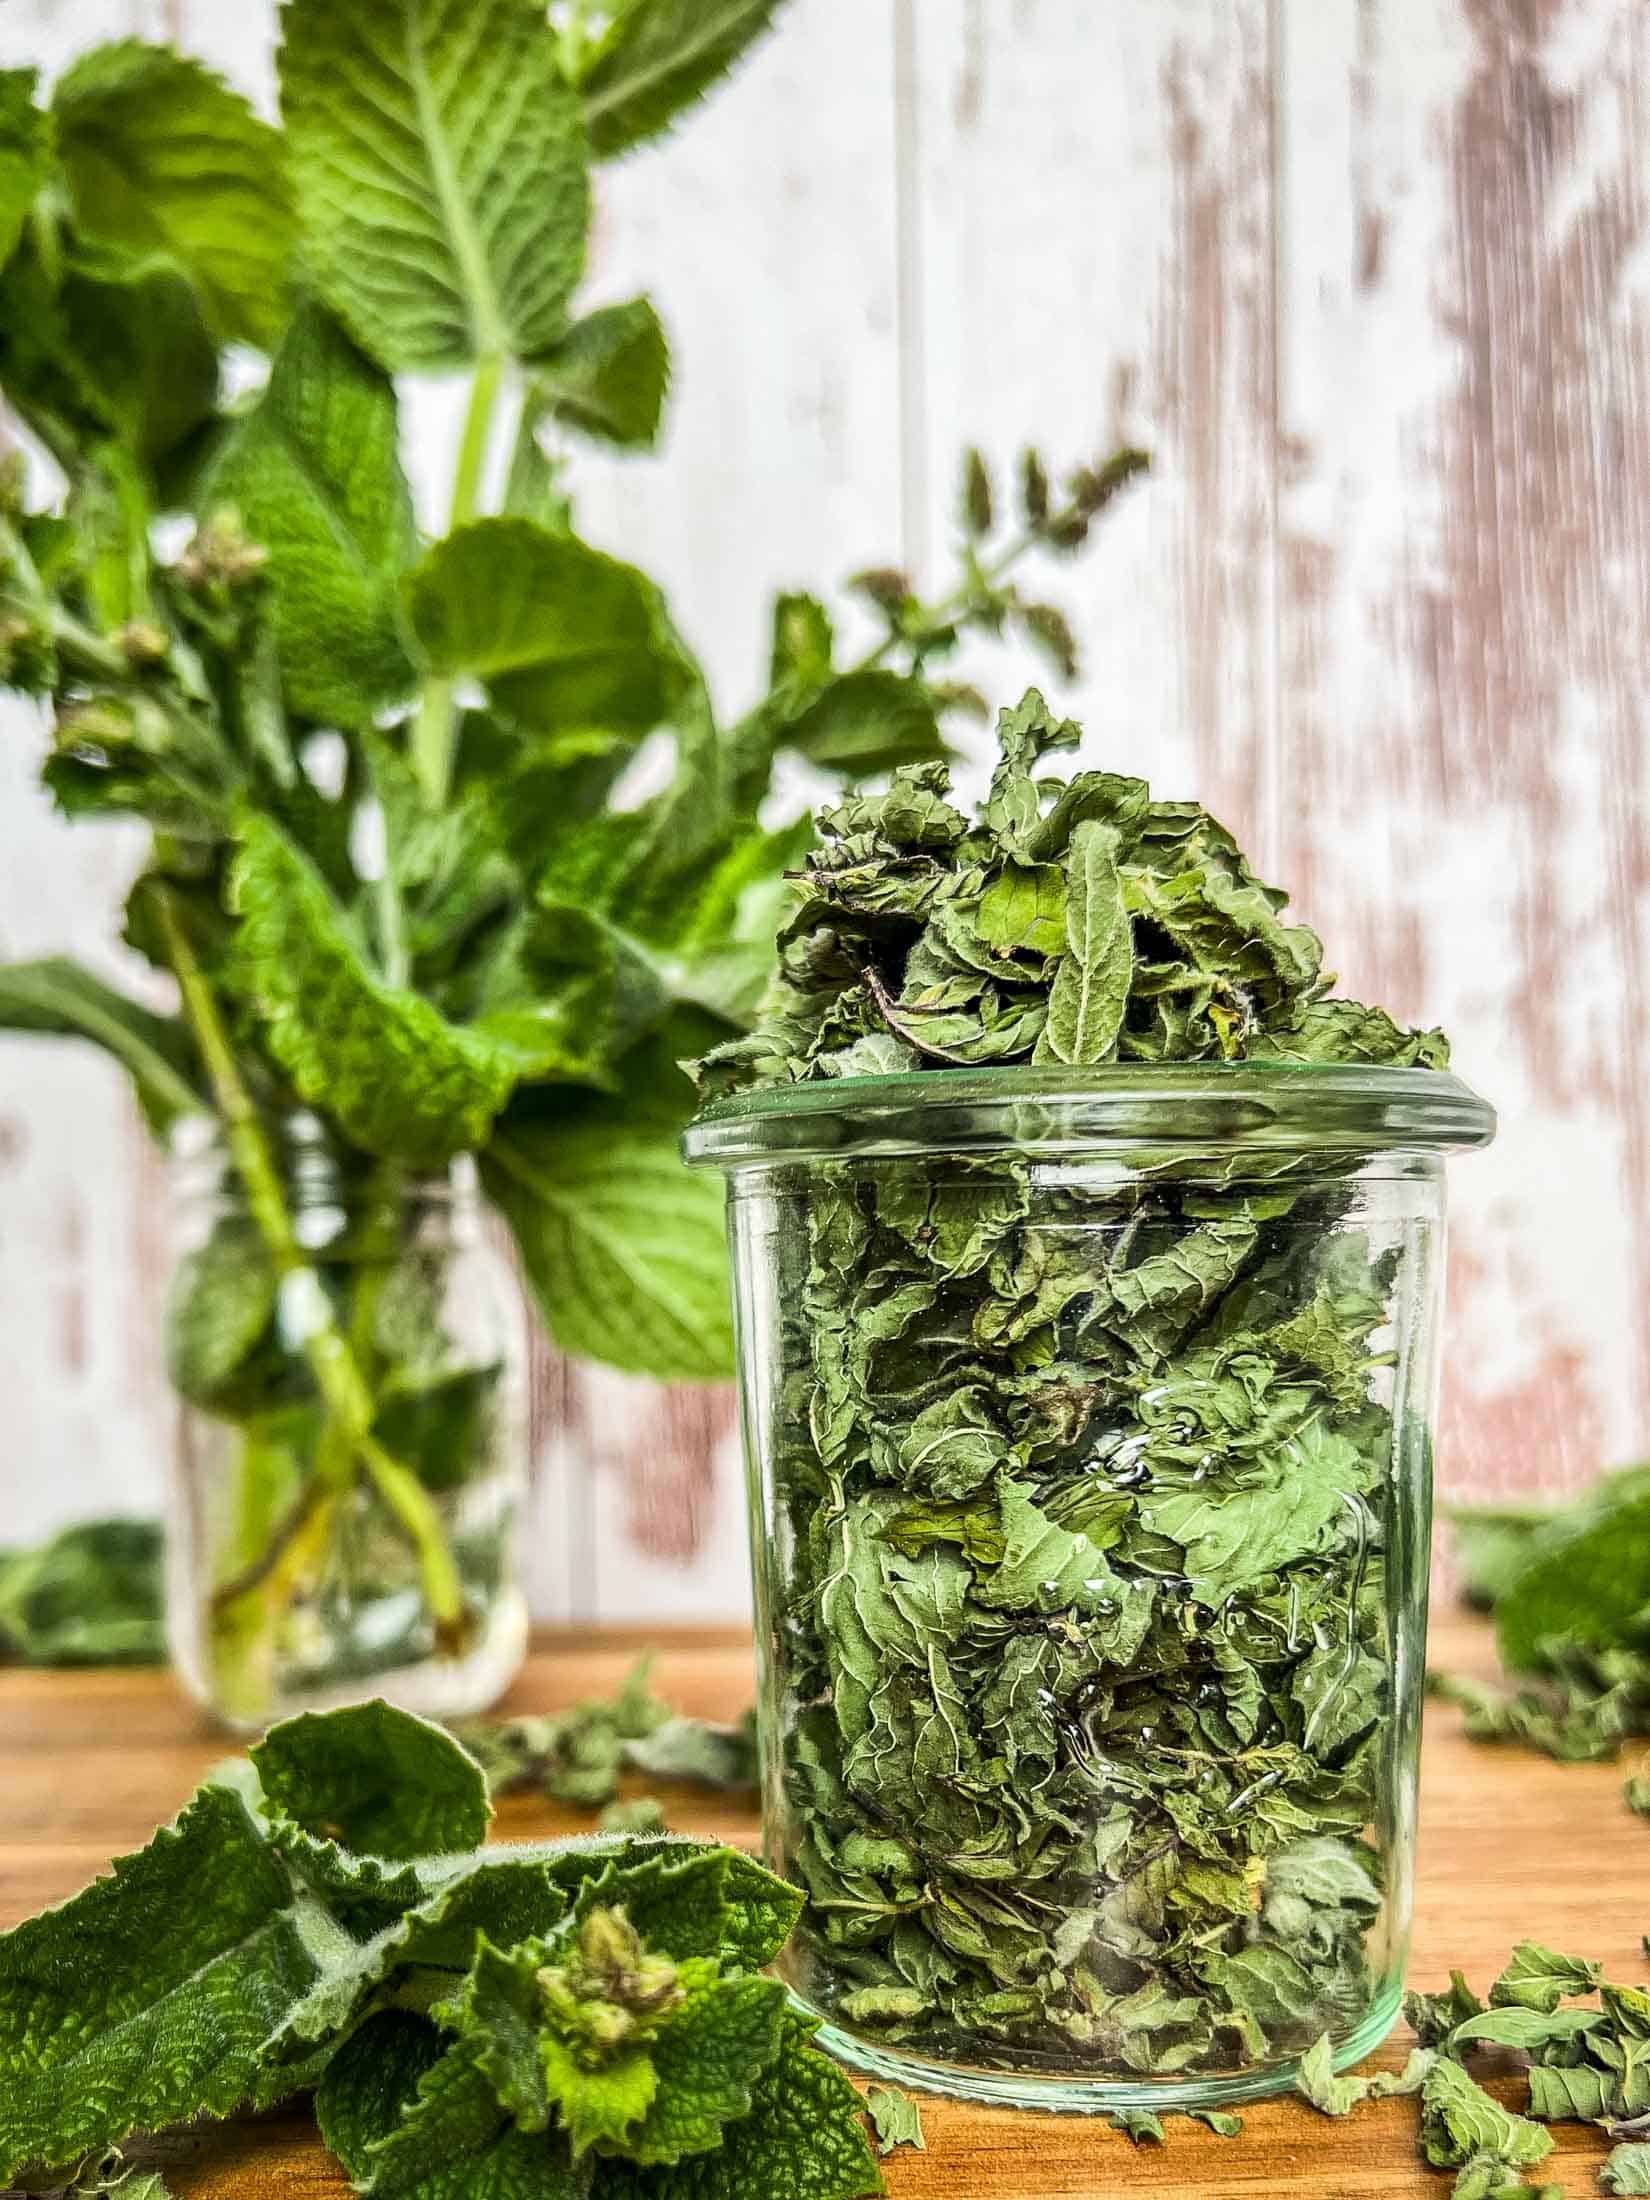 Dried mint leaves in a small glass jar with fresh leaves in a jar of water in the background.